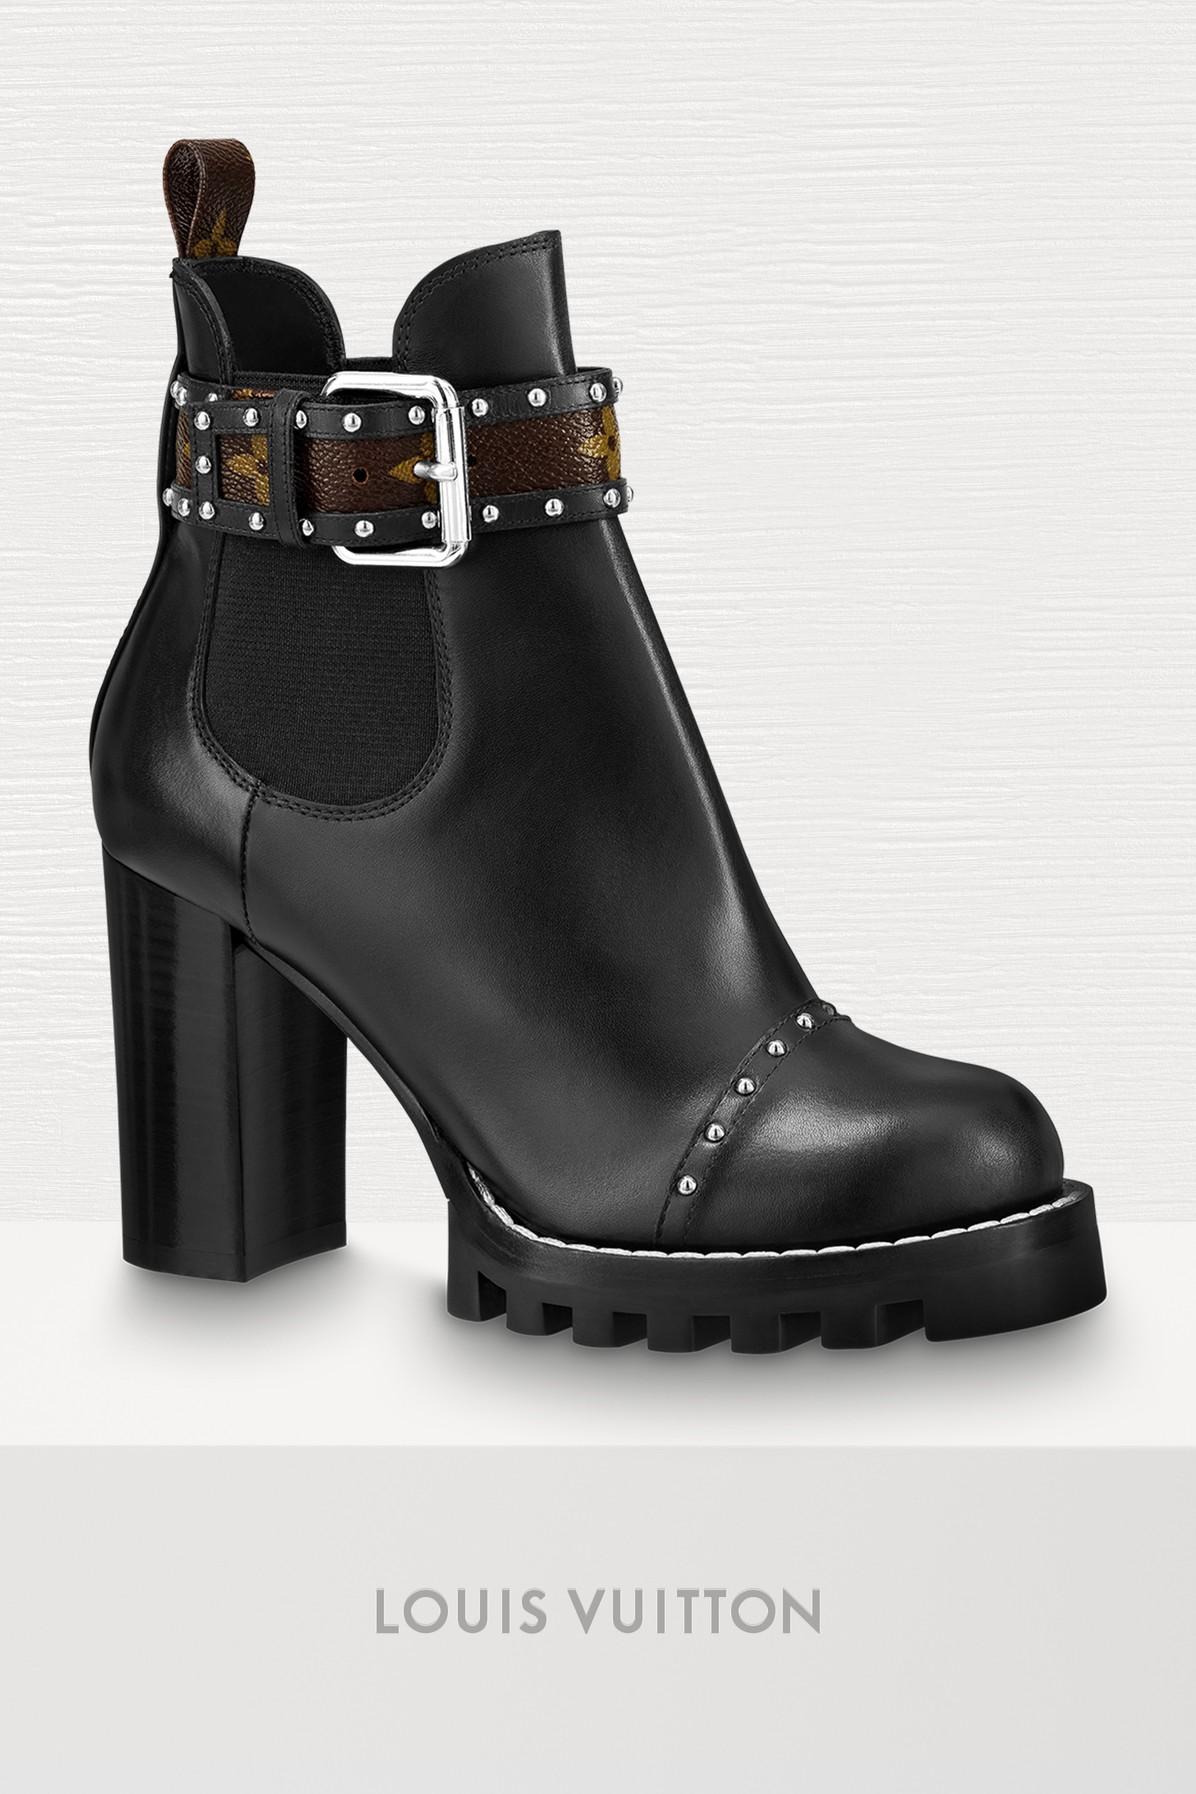 louis vuitton chunky boots